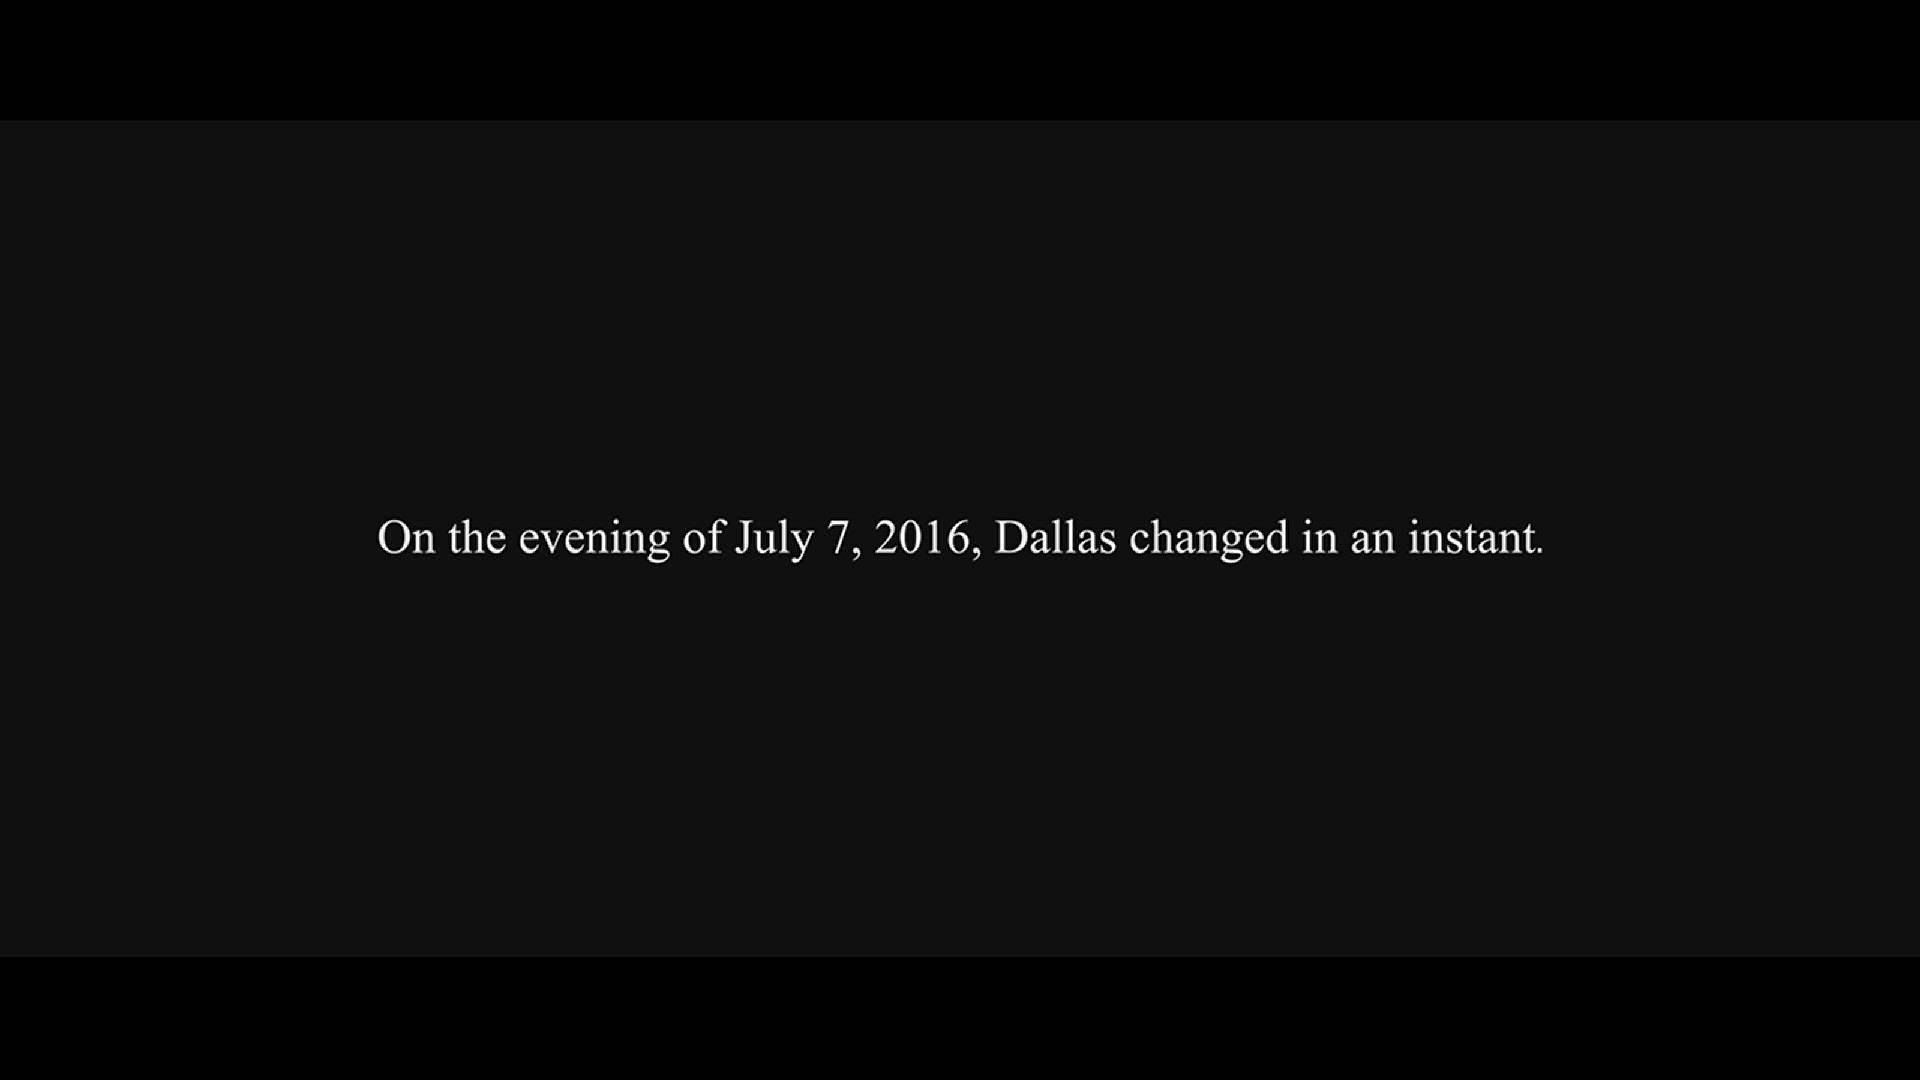 A poignant interview with WFAA reporter Tanya Eiserer as she remembers the tragedy that unfolded in Dallas on 7/7.